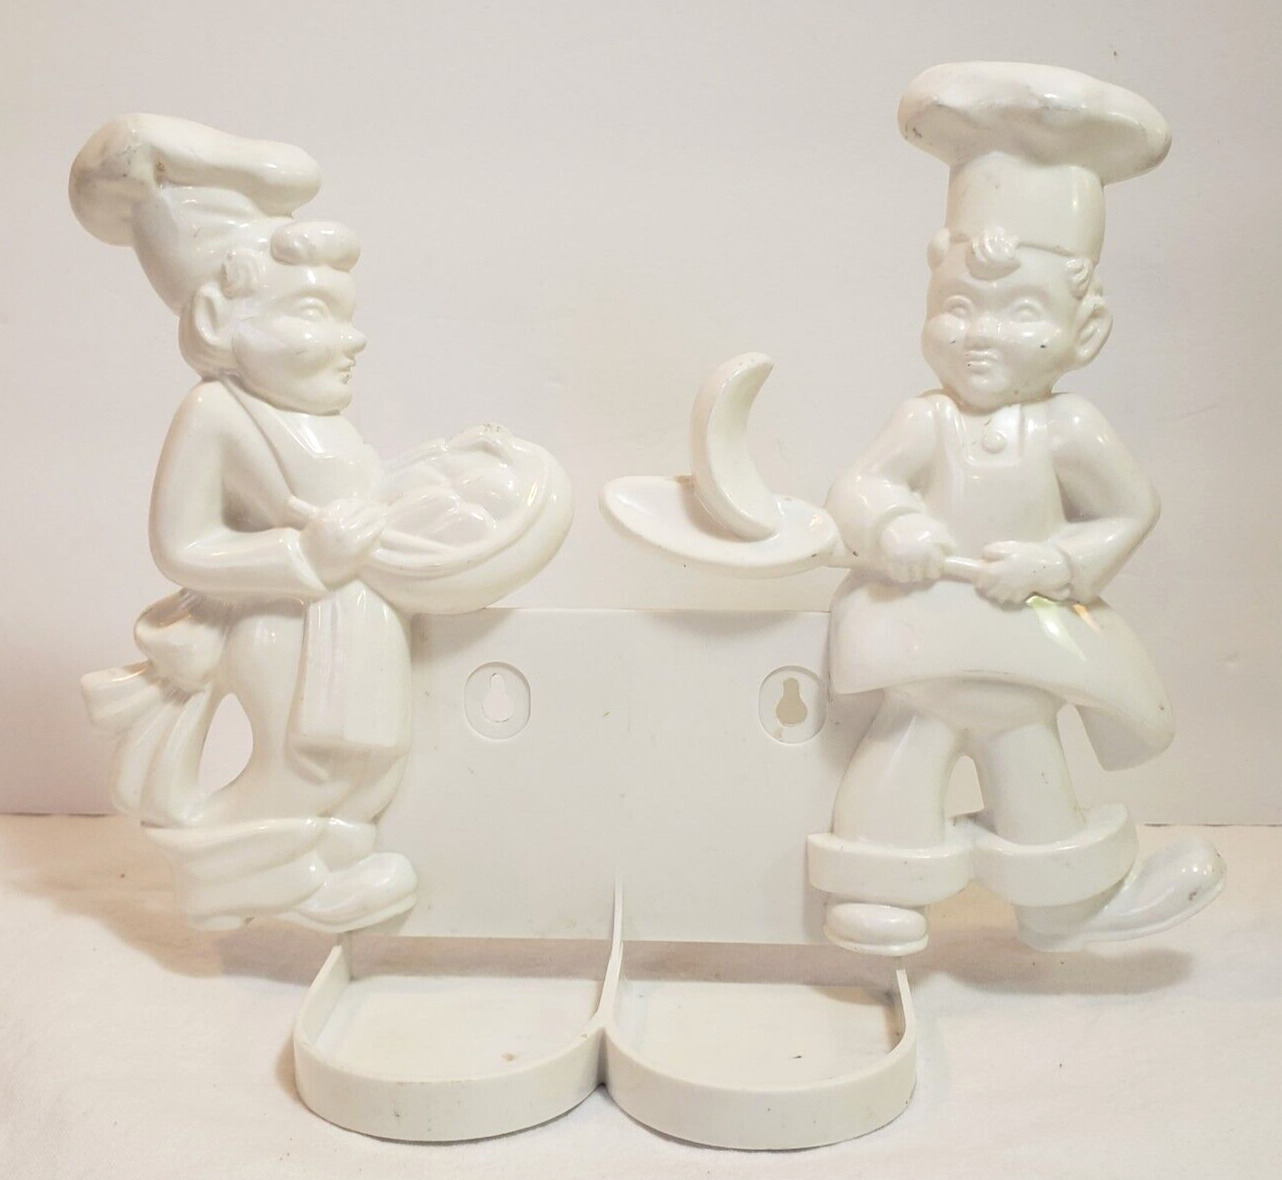 VINTAGE TREMAX DUAL CHEF SALT & PEPPER Wall mount HOLDER ONLY 1950s white